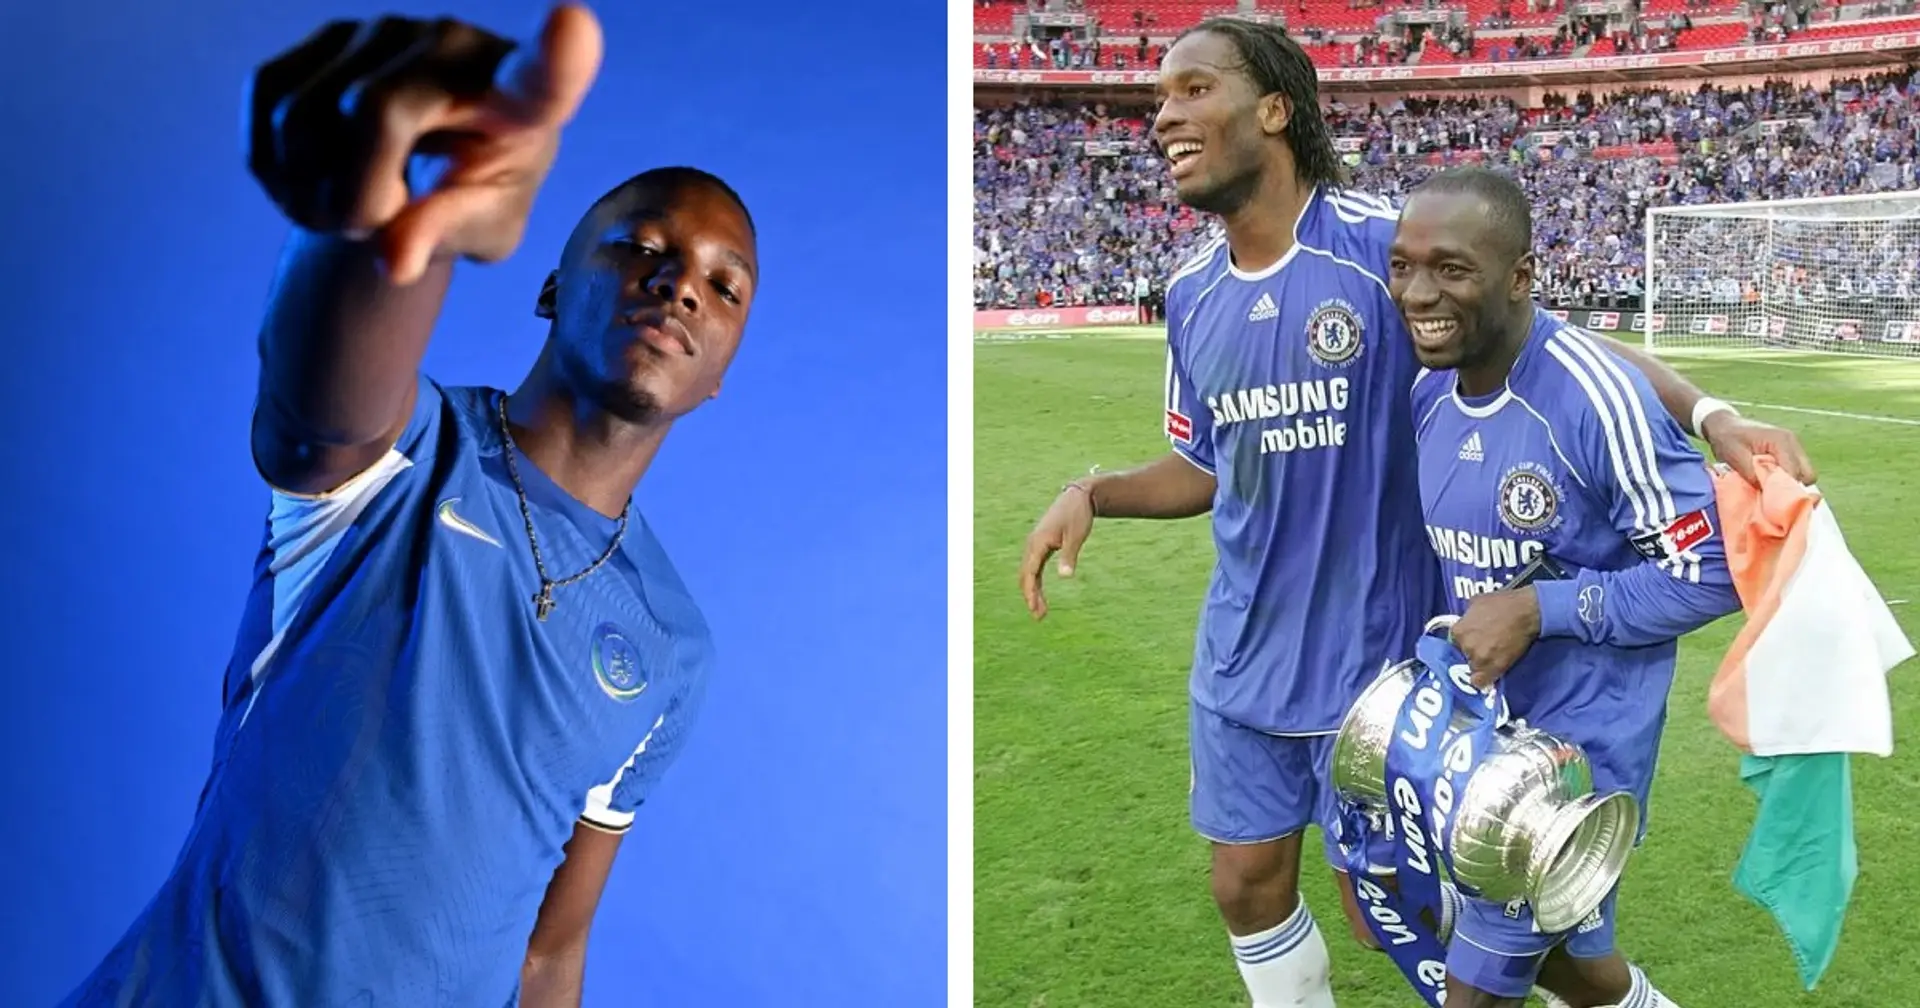 'They were so humble on the pitch': Caicedo names two Chelsea legends that inspired him